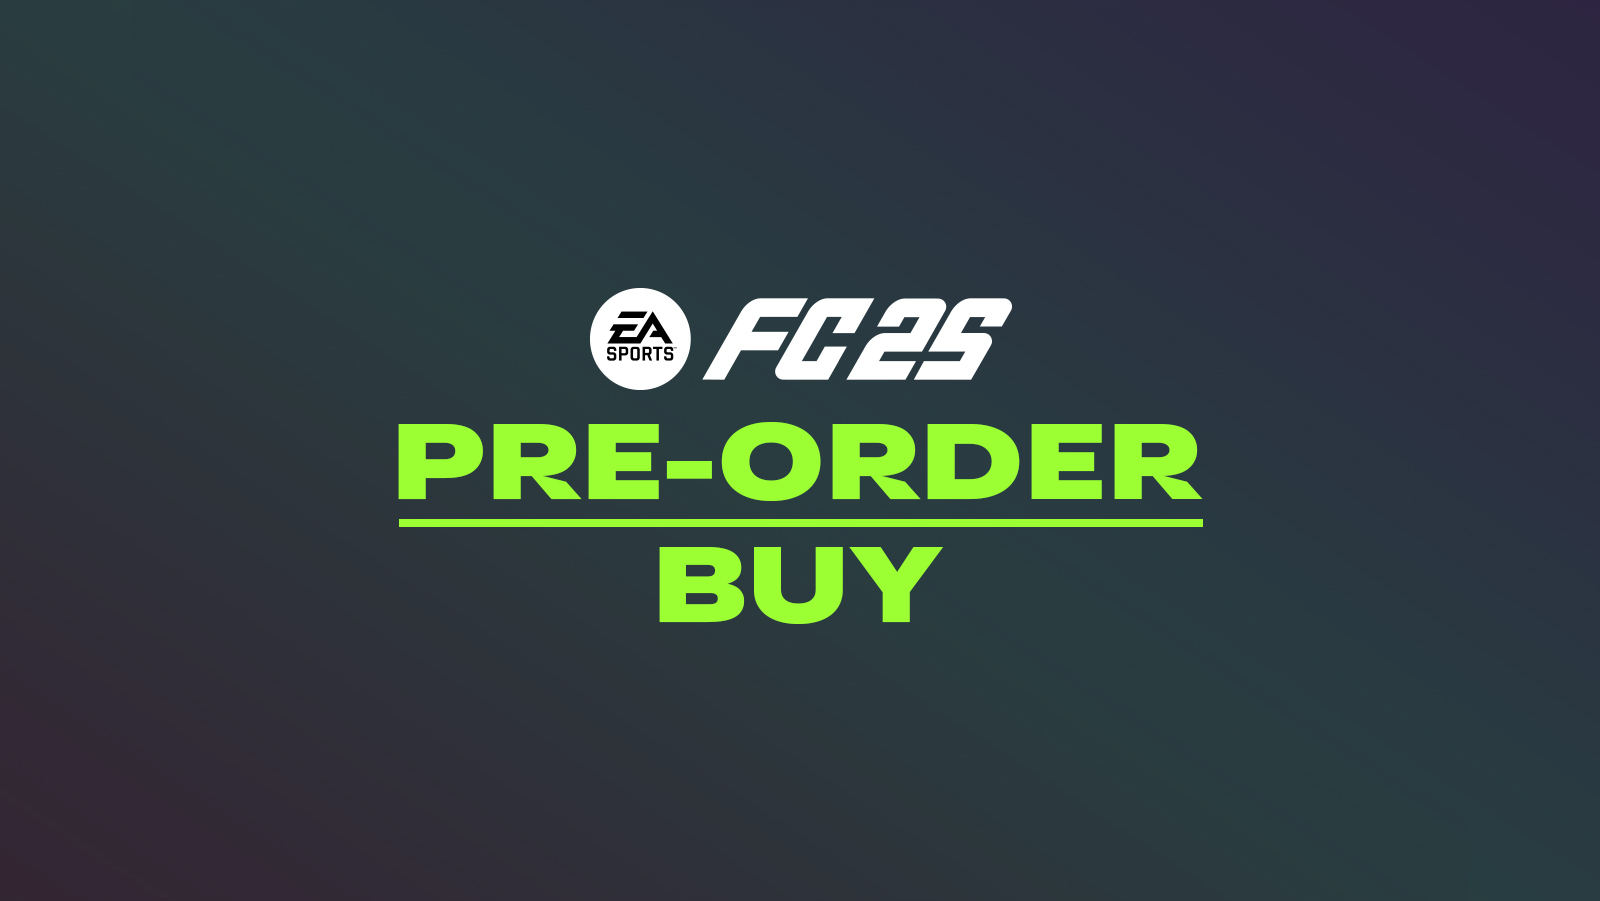 Buy and Pre-order EA SPORTS FC 25